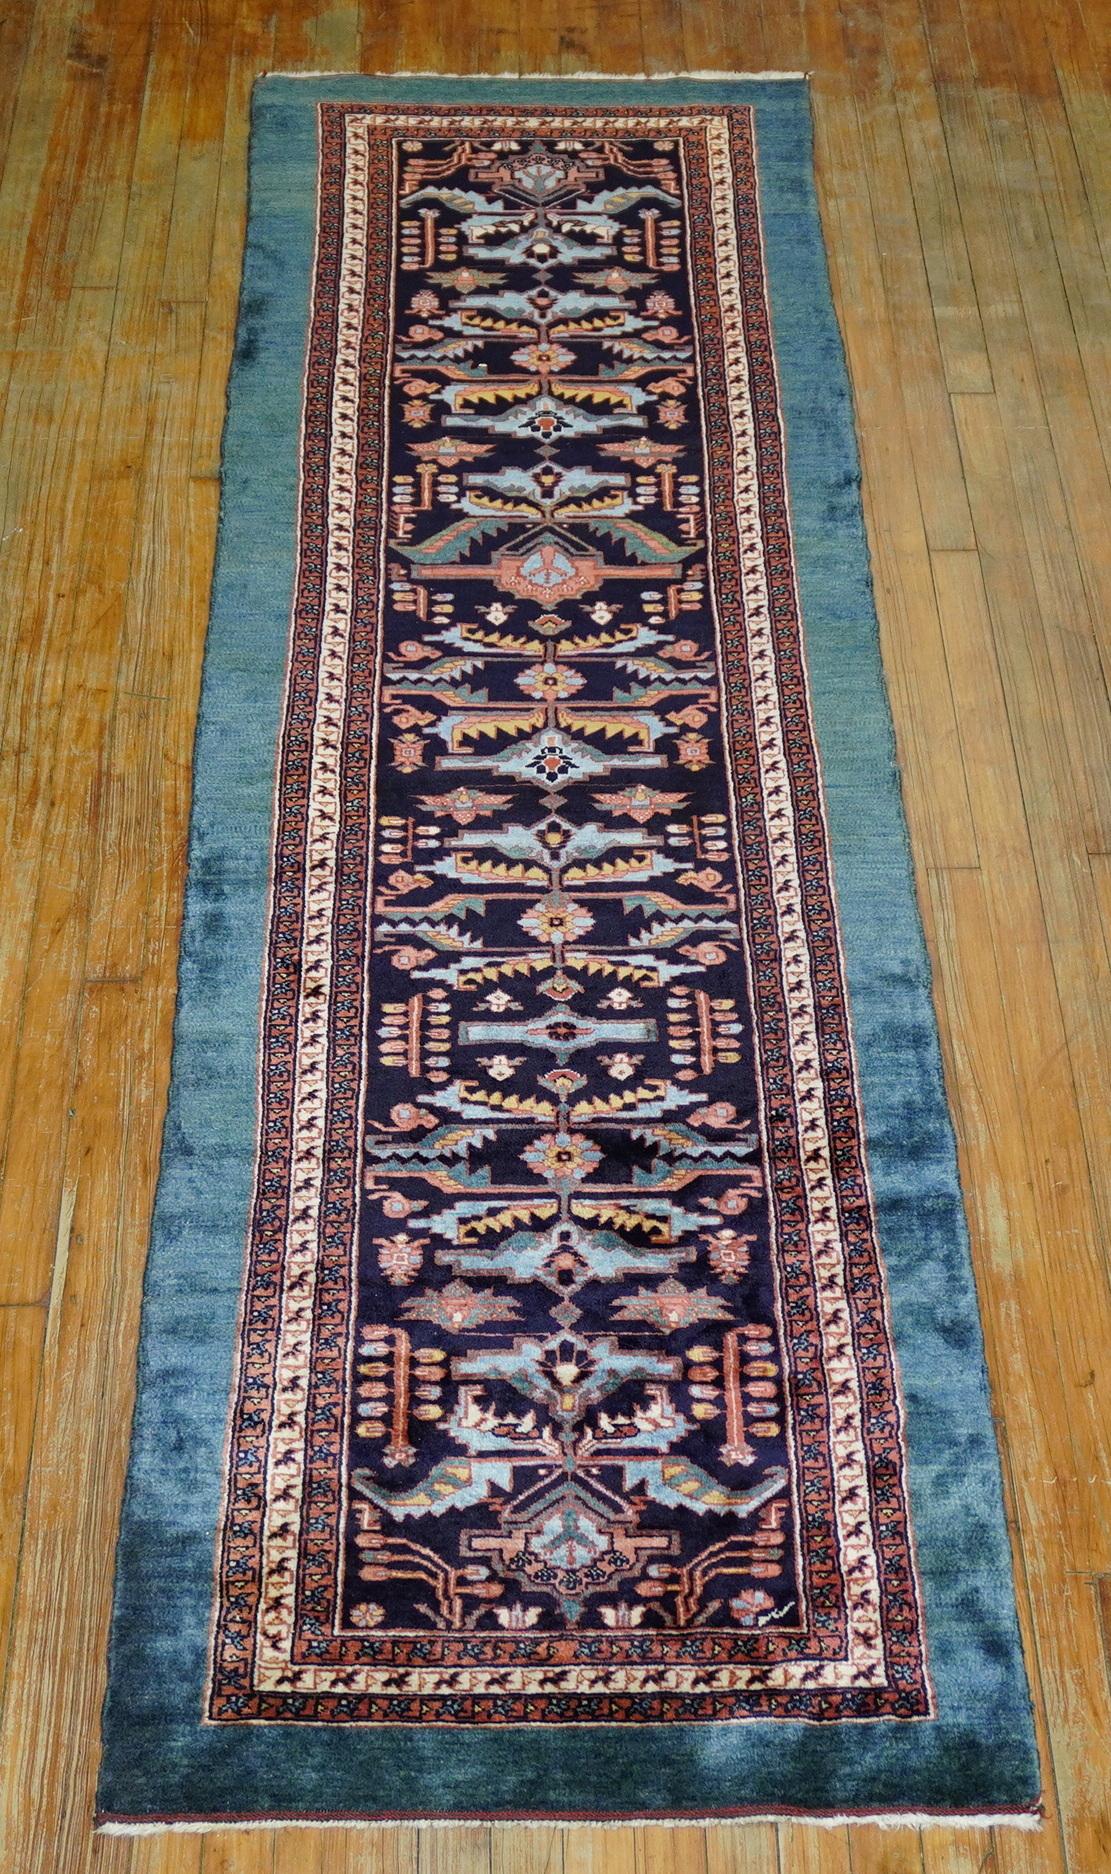 Late 20th century 100% vegetable Dyed Persian Kashkuli runner featuring an odd teal outer border resembling Persian tribal serab and Persian bakshaish rugs

Measures: 2'6'' x 8'11''.